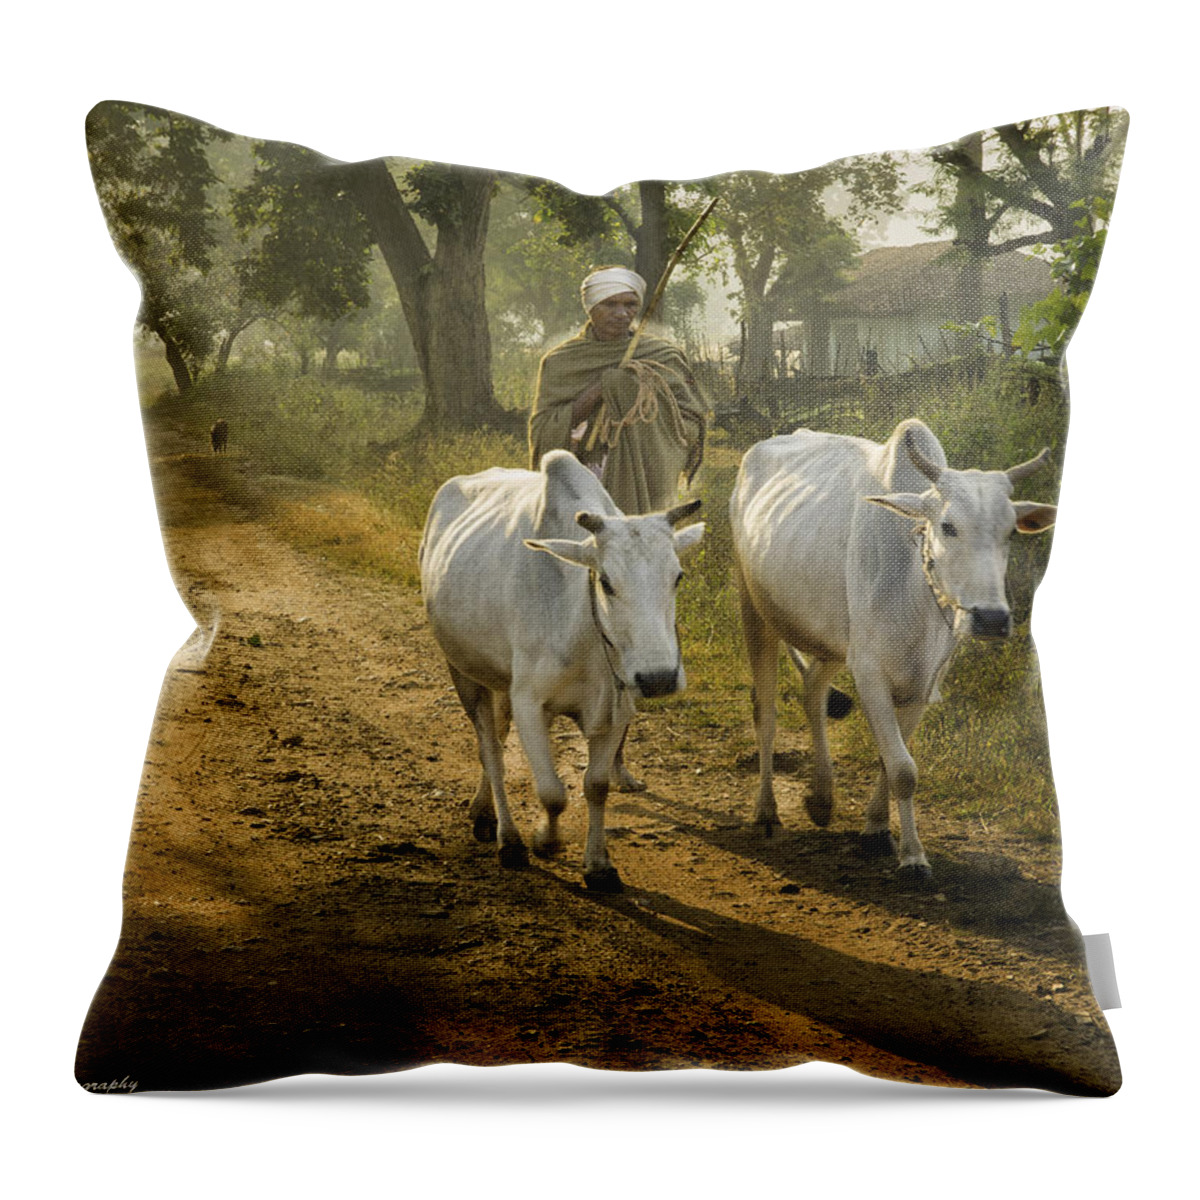 India Throw Pillow featuring the photograph Heading Home by Fran Gallogly